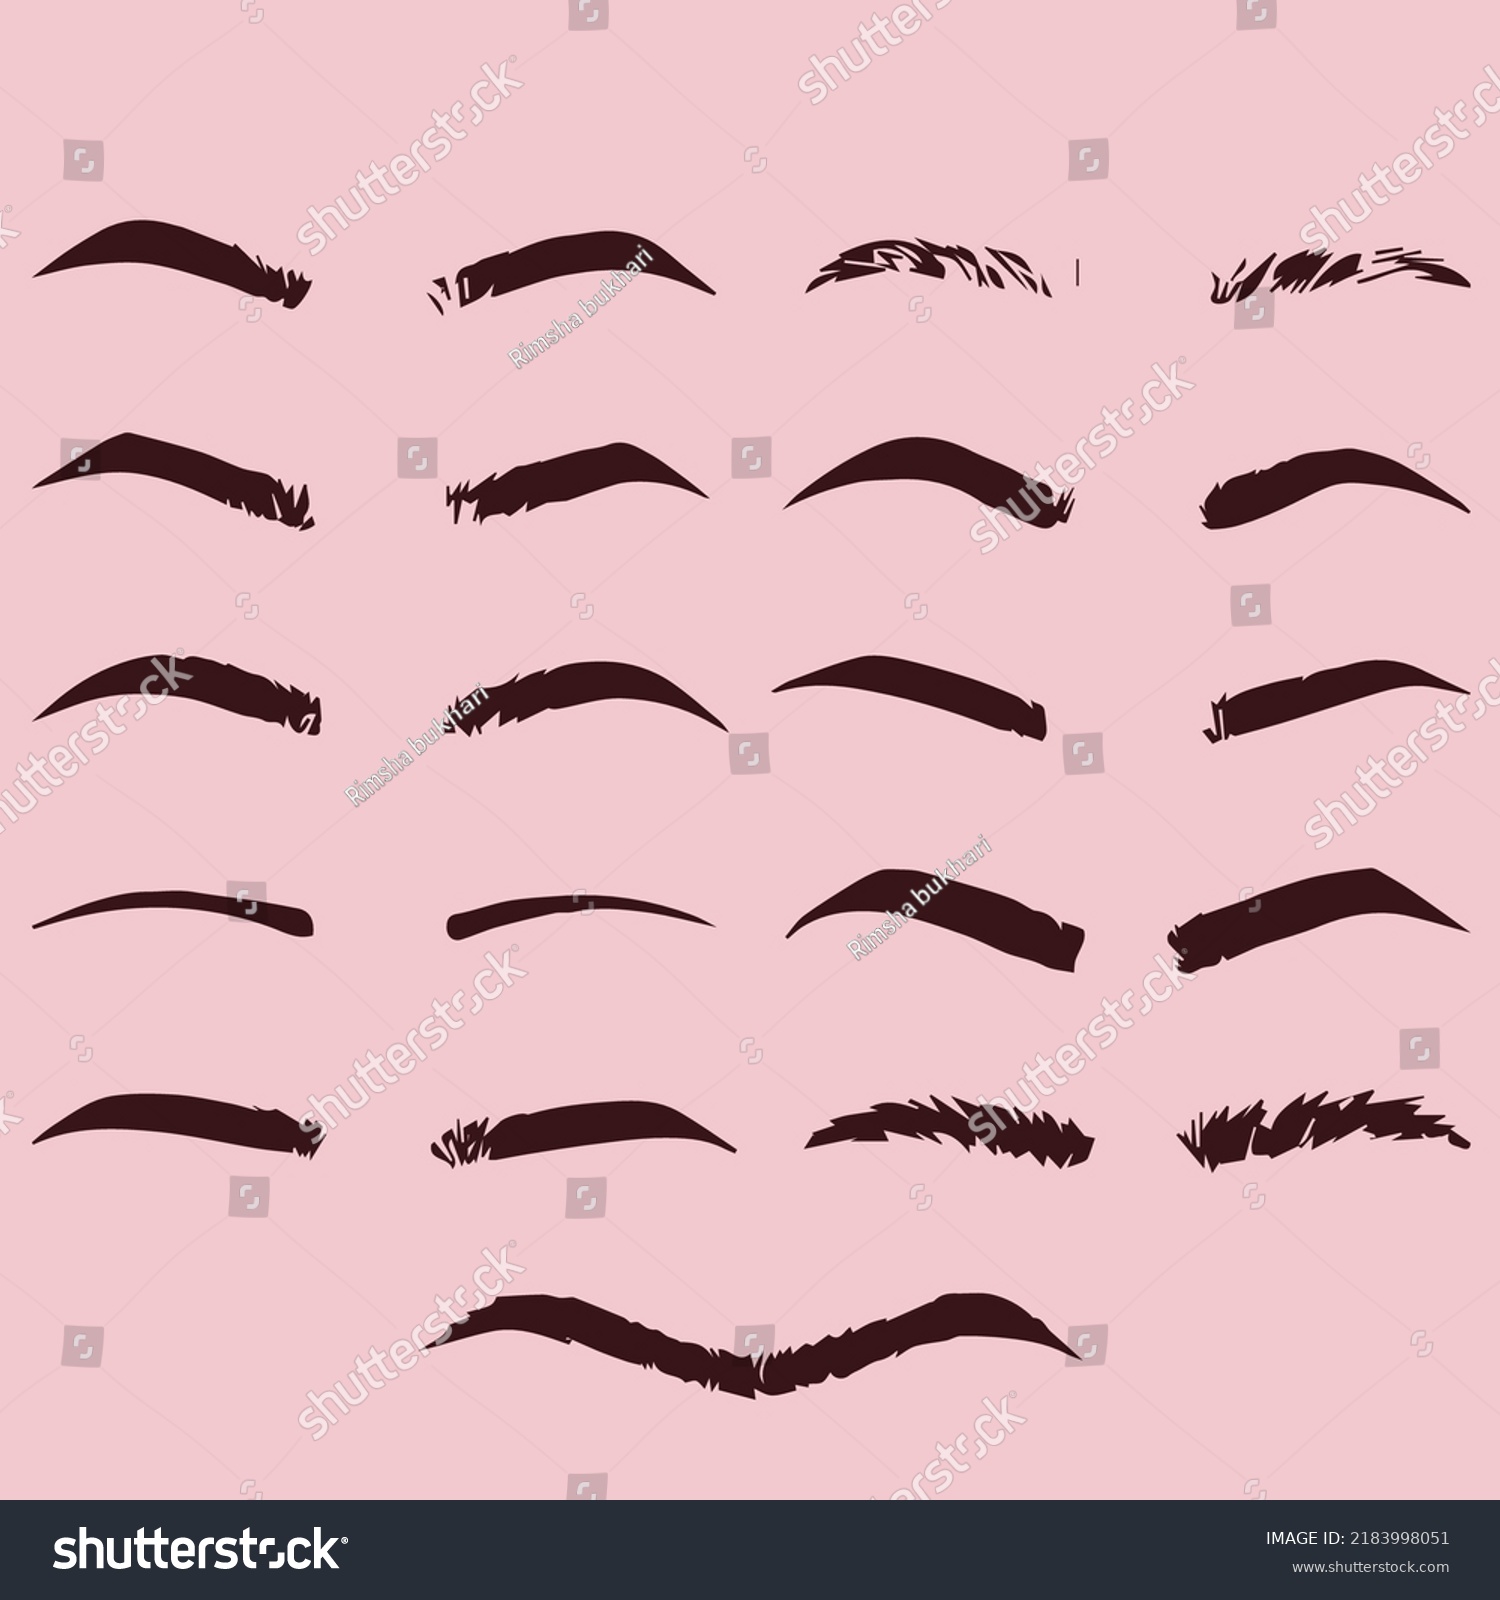 Eyebrow Shapes Various Types Eyebrows Classic Stock Vector Royalty